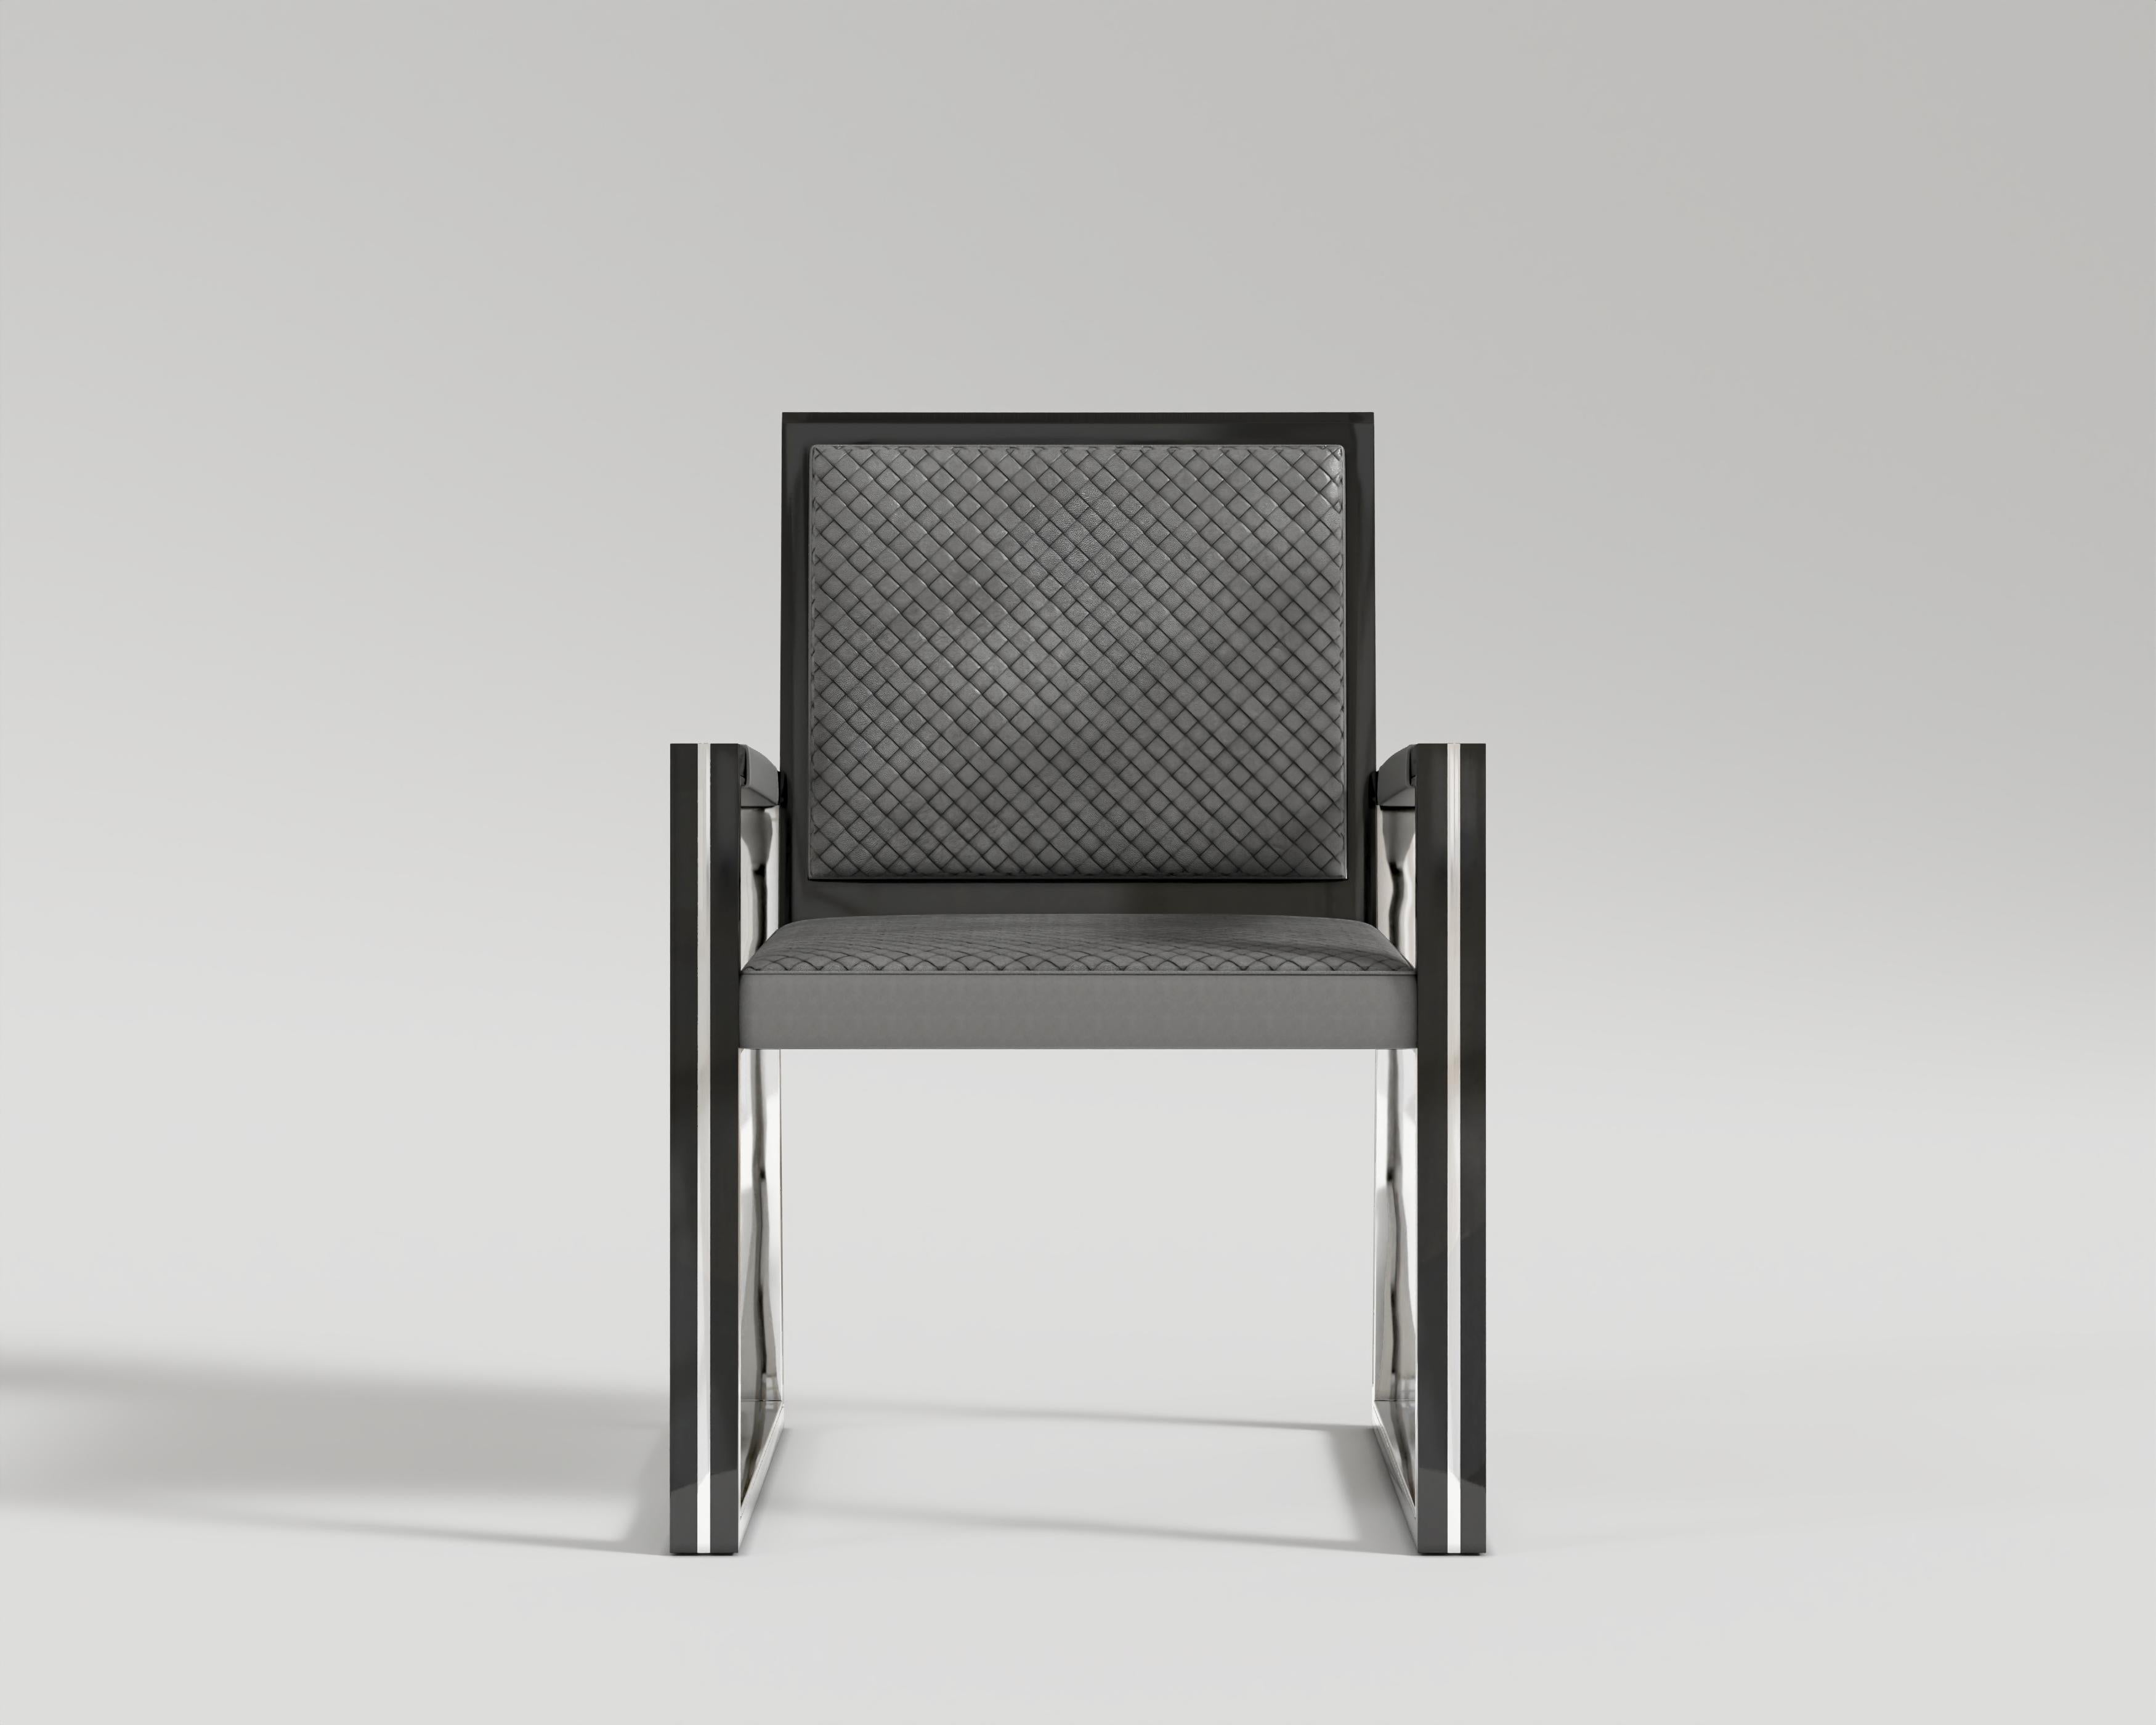 Buccina Dining Chair

Extremely robust-designed, the Buccina Dining Chair is an inspiration of boldness and art deco inspiration into one piece. A definite statement to any dining room, with the thin, sleek black lacquer frame. Customize with cool